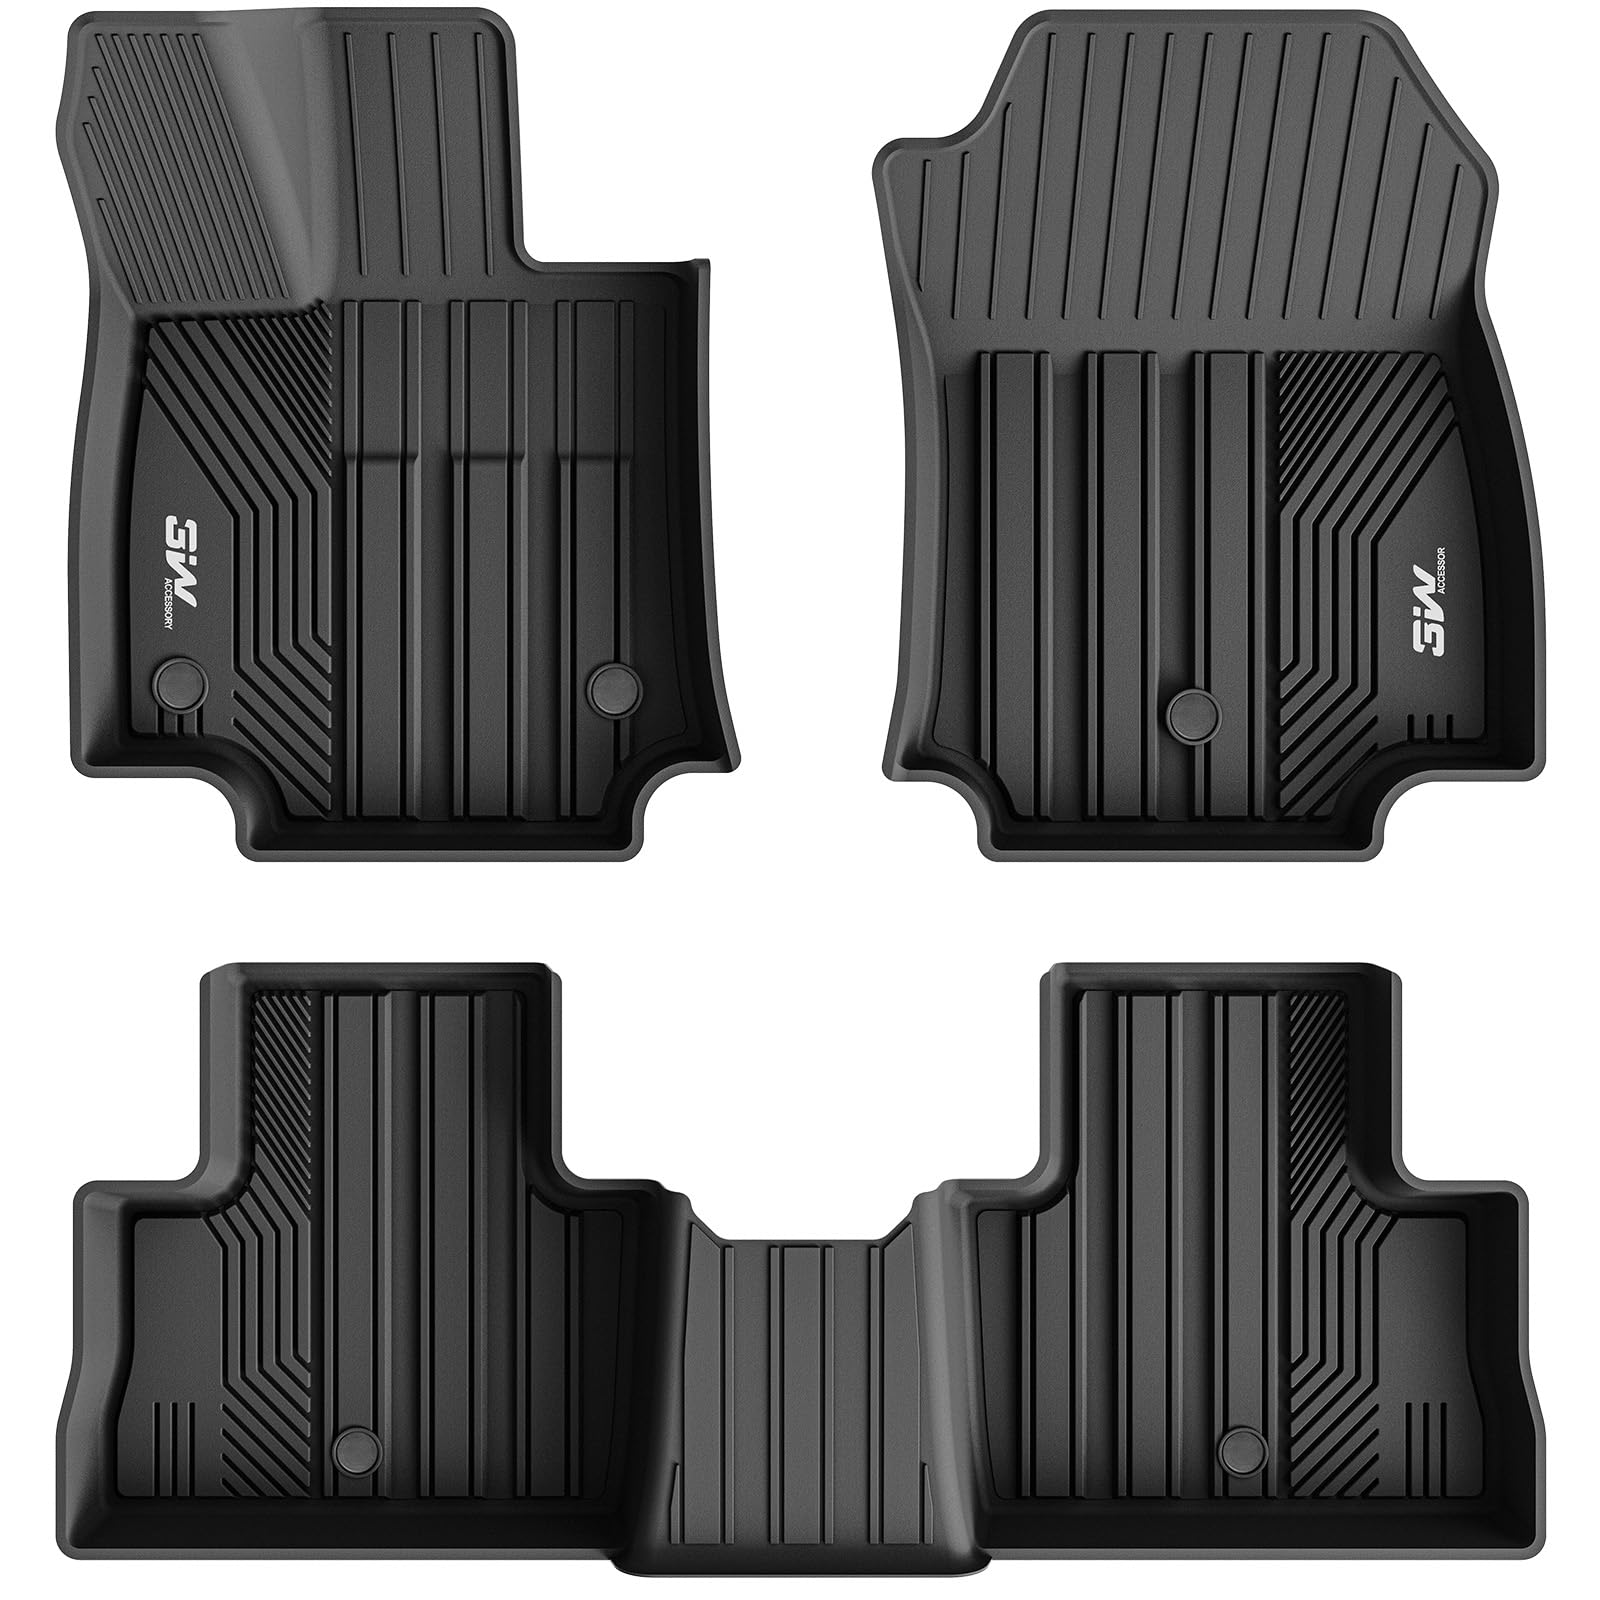 3W Toyota RAV4 2019-2023 Custom Floor Mats Cargo Liner TPE Material & All-Weather Protection Vehicles & Parts 3Wliners 2019-2023 RAV4 2019-2023 1st&2nd Row Mats